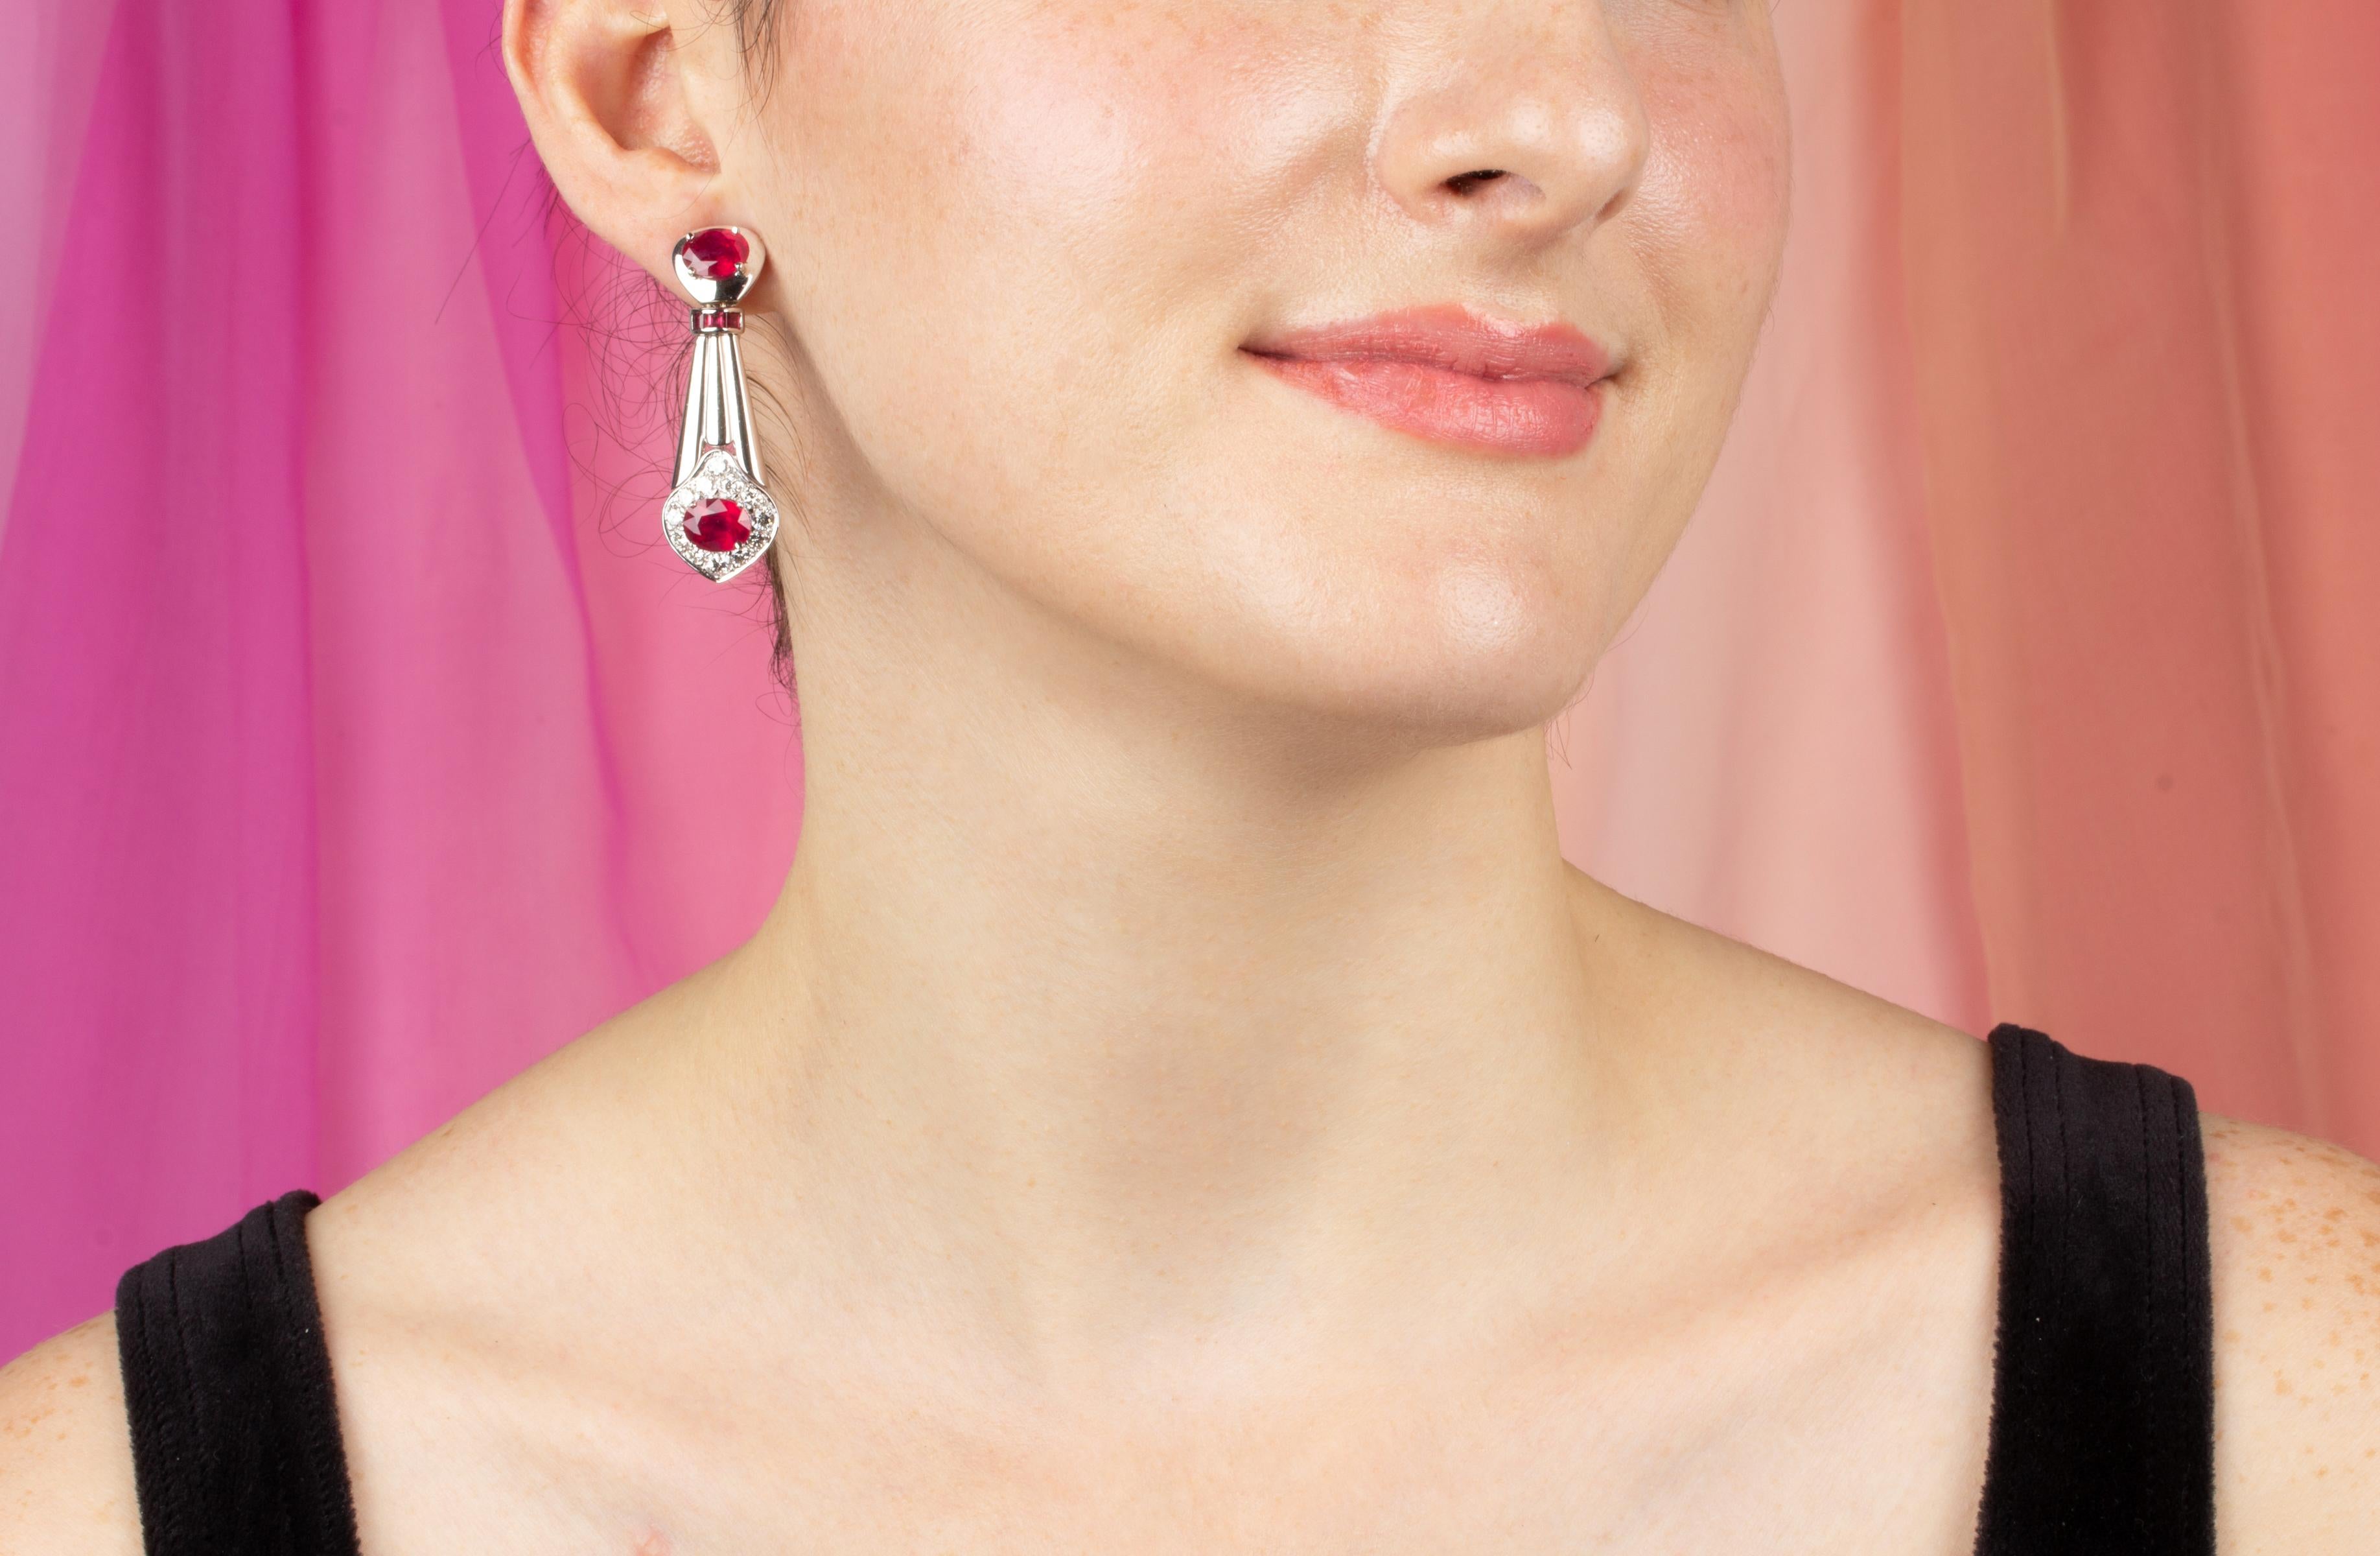 The earrings feature 7.50 carats of faceted rubies (oval and square cut). The design is complete with 1.30 carats of round diamonds of top quality (color, clarity and cut, F-G/VVS).
The earrings were entirely hand made in 18 carat white gold by